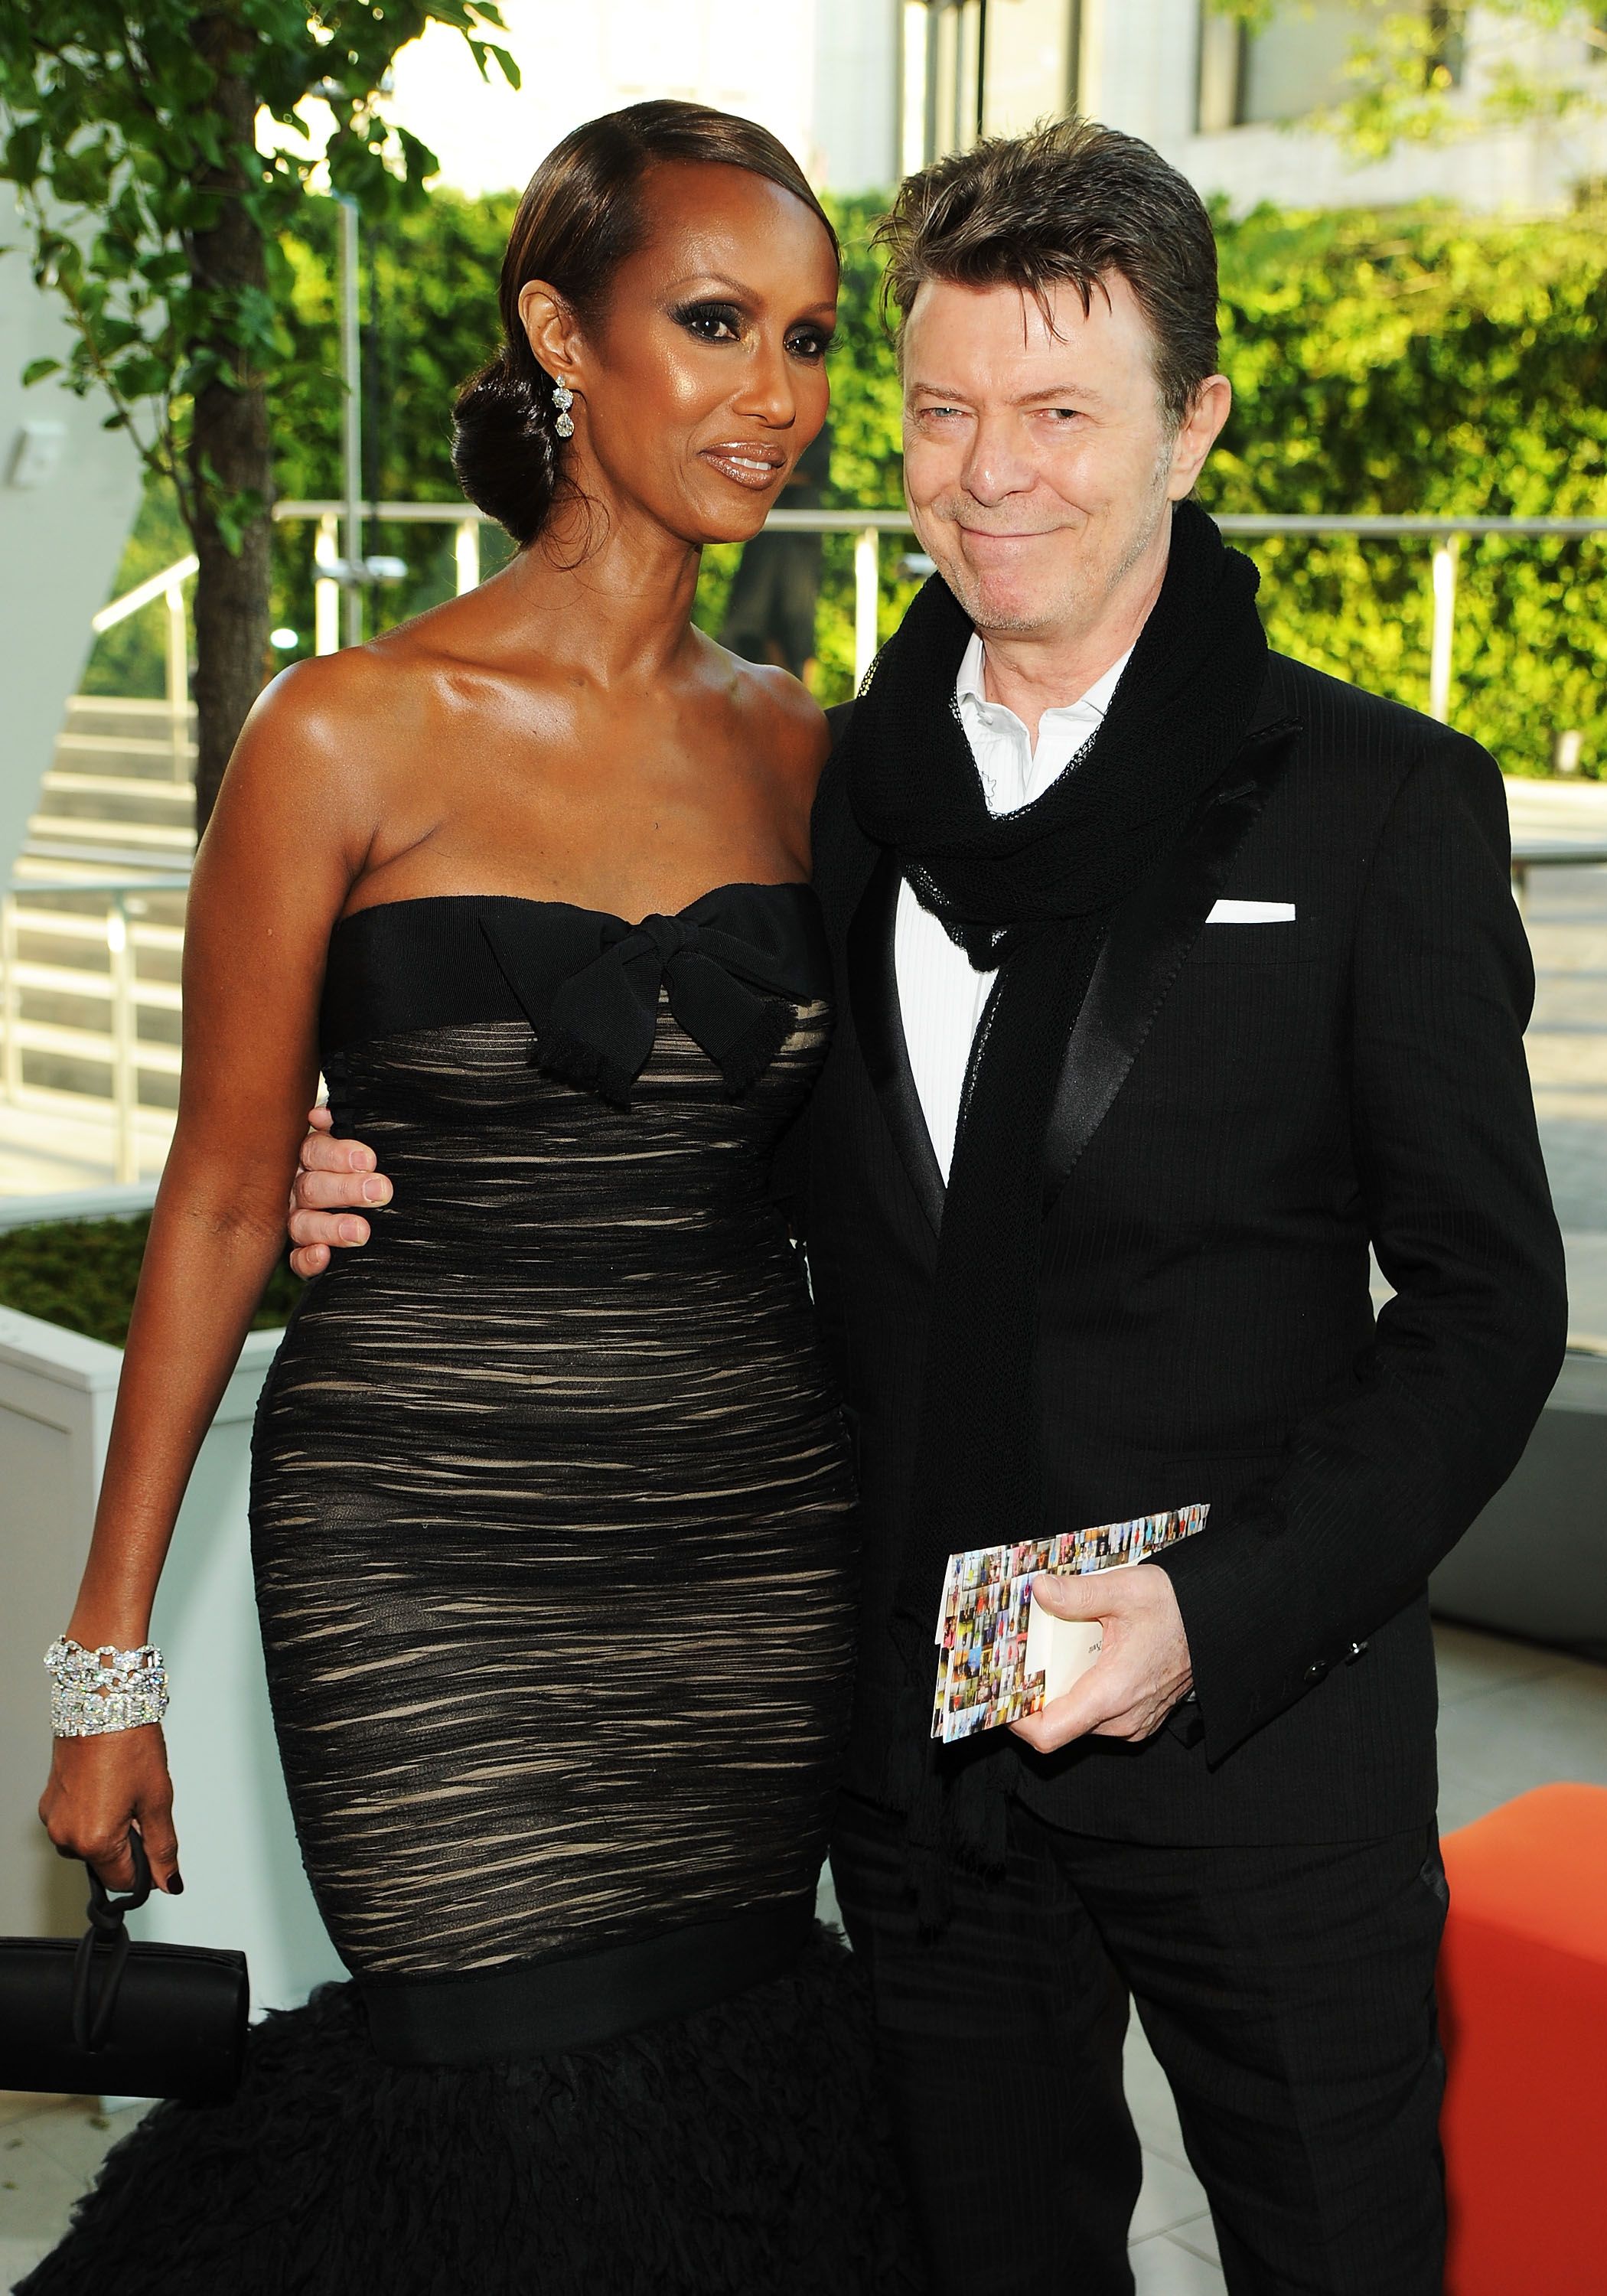 Model Iman and musician David Bowie at the 2010 CFDA Fashion Awards at Alice Tully Hall, Lincoln Center on June 7, 2010 | Photo: Getty Images